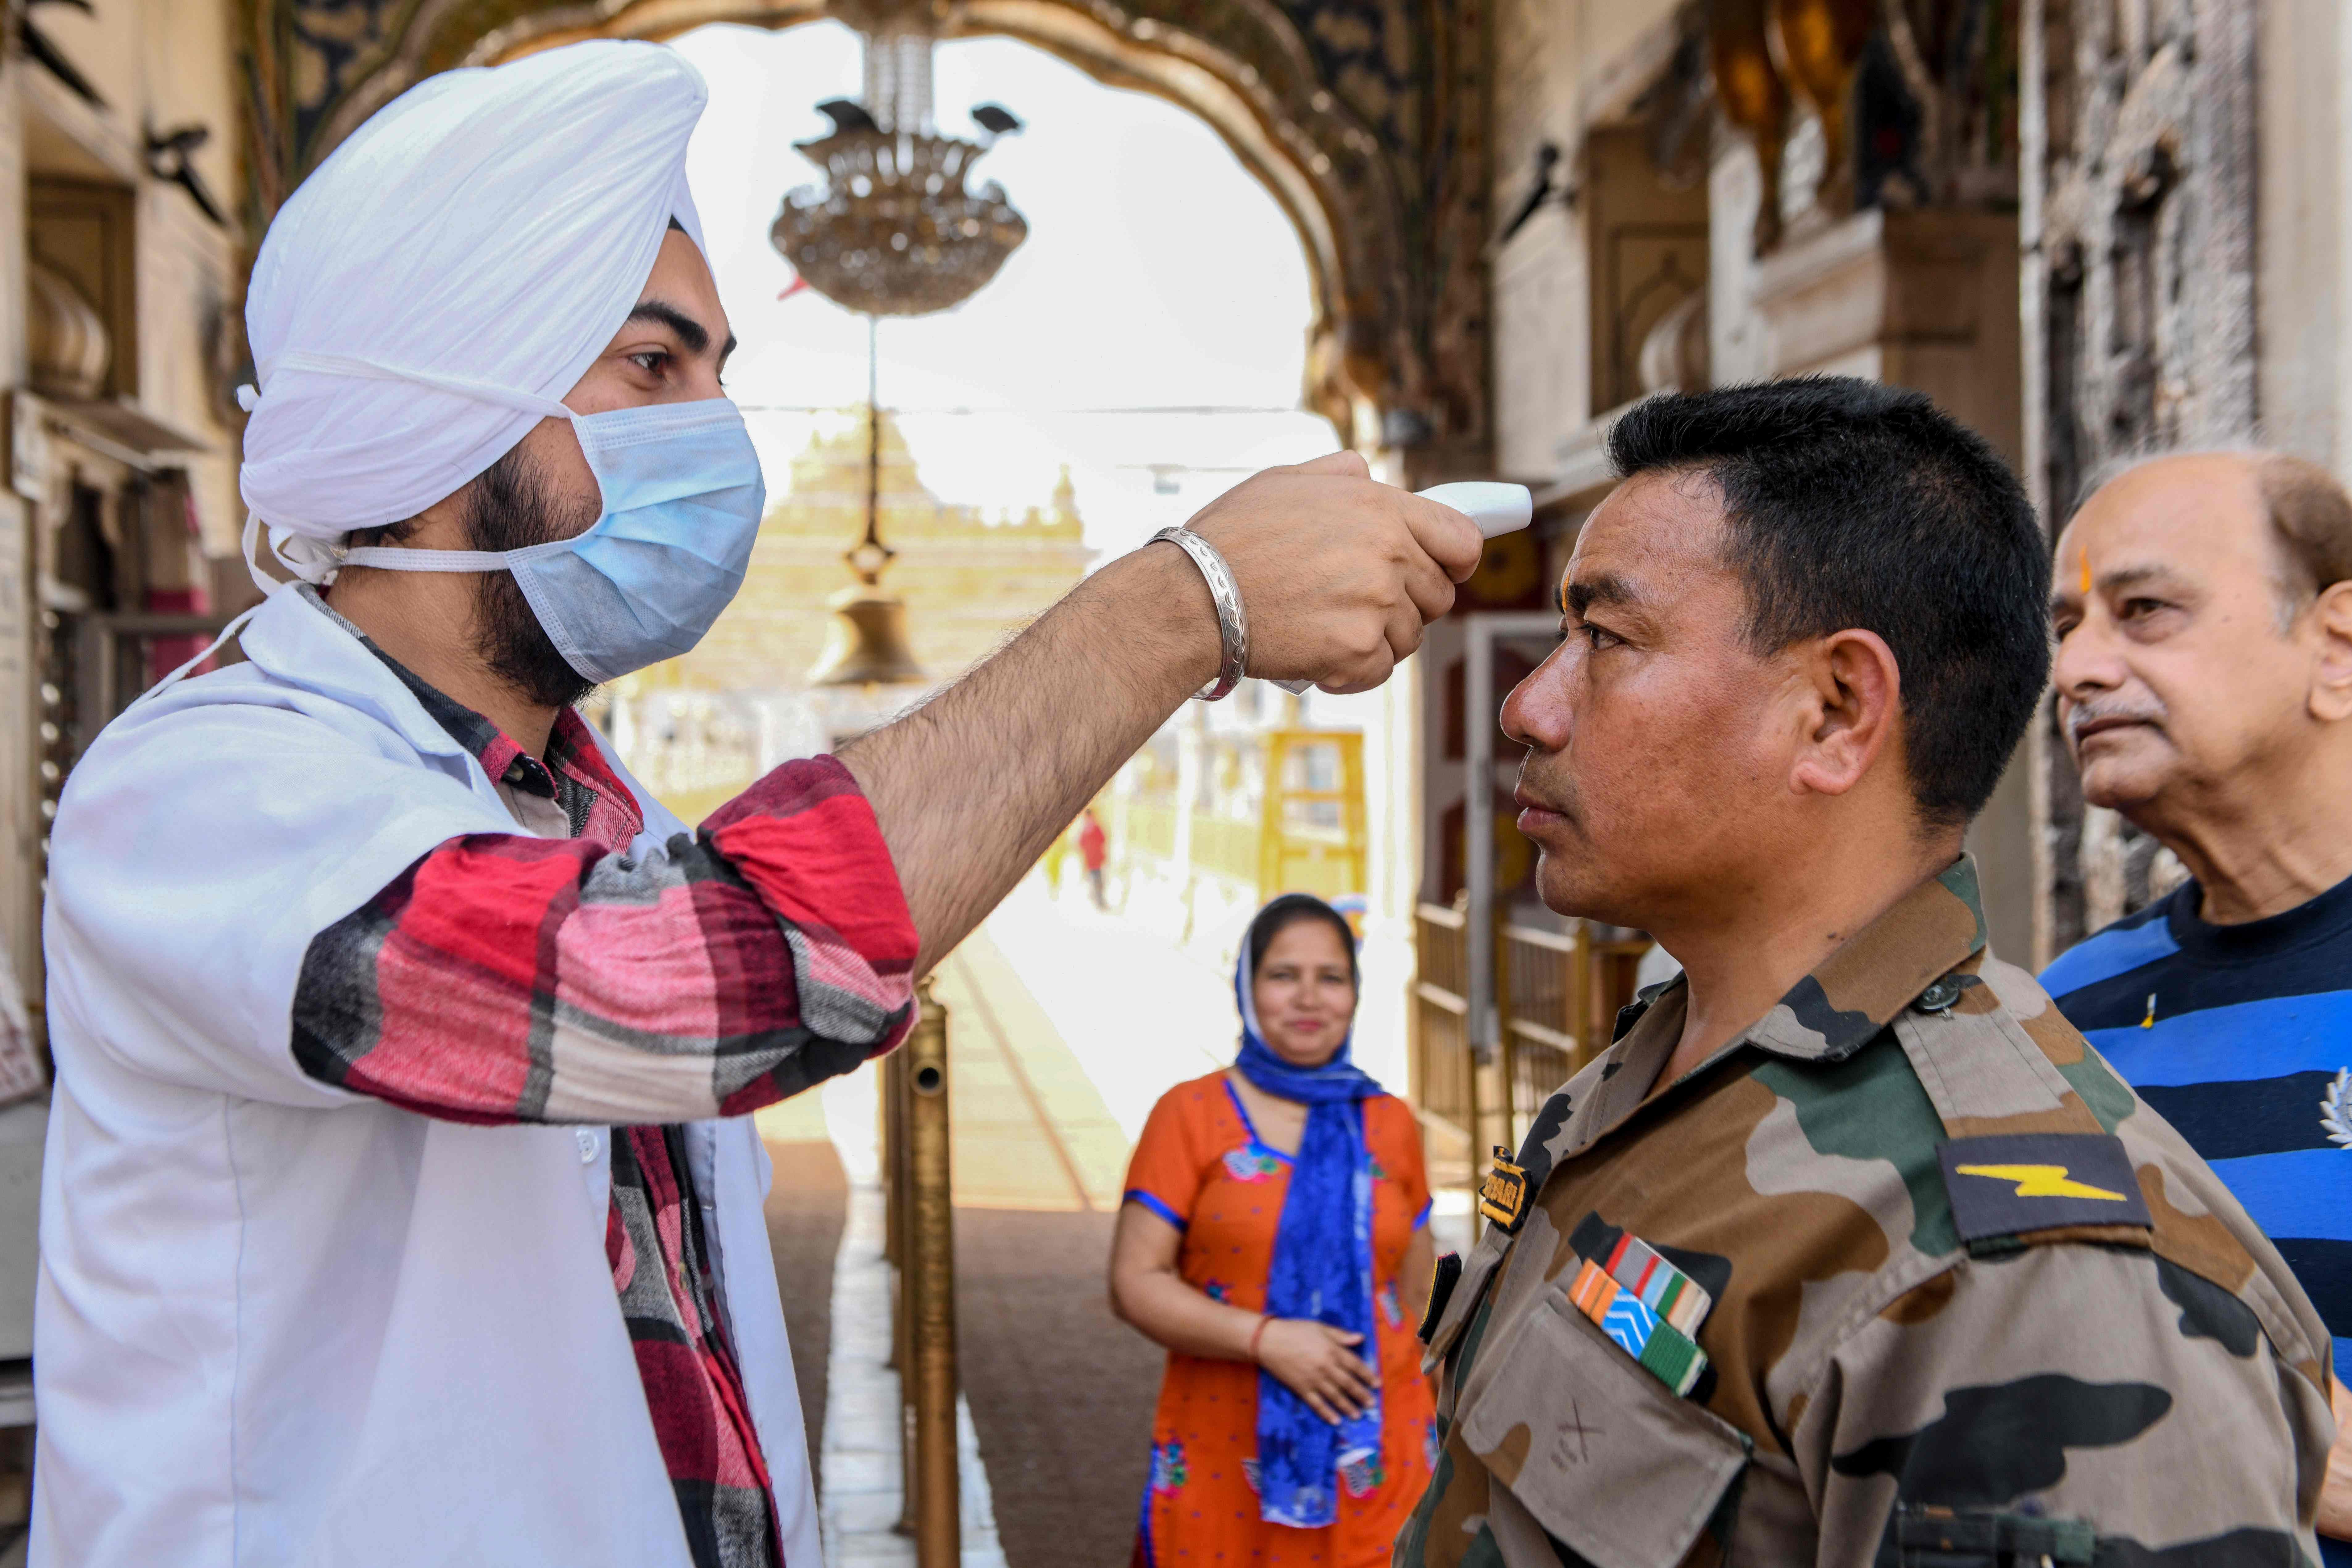 A health worker (L) wearing a facemask checks the body temperature of an army personnel, amid concerns over the spread of the COVID-19 novel coronavirus, at the entrance of the Durgiana Temple in Amritsar. (Credit: AFP Photo)